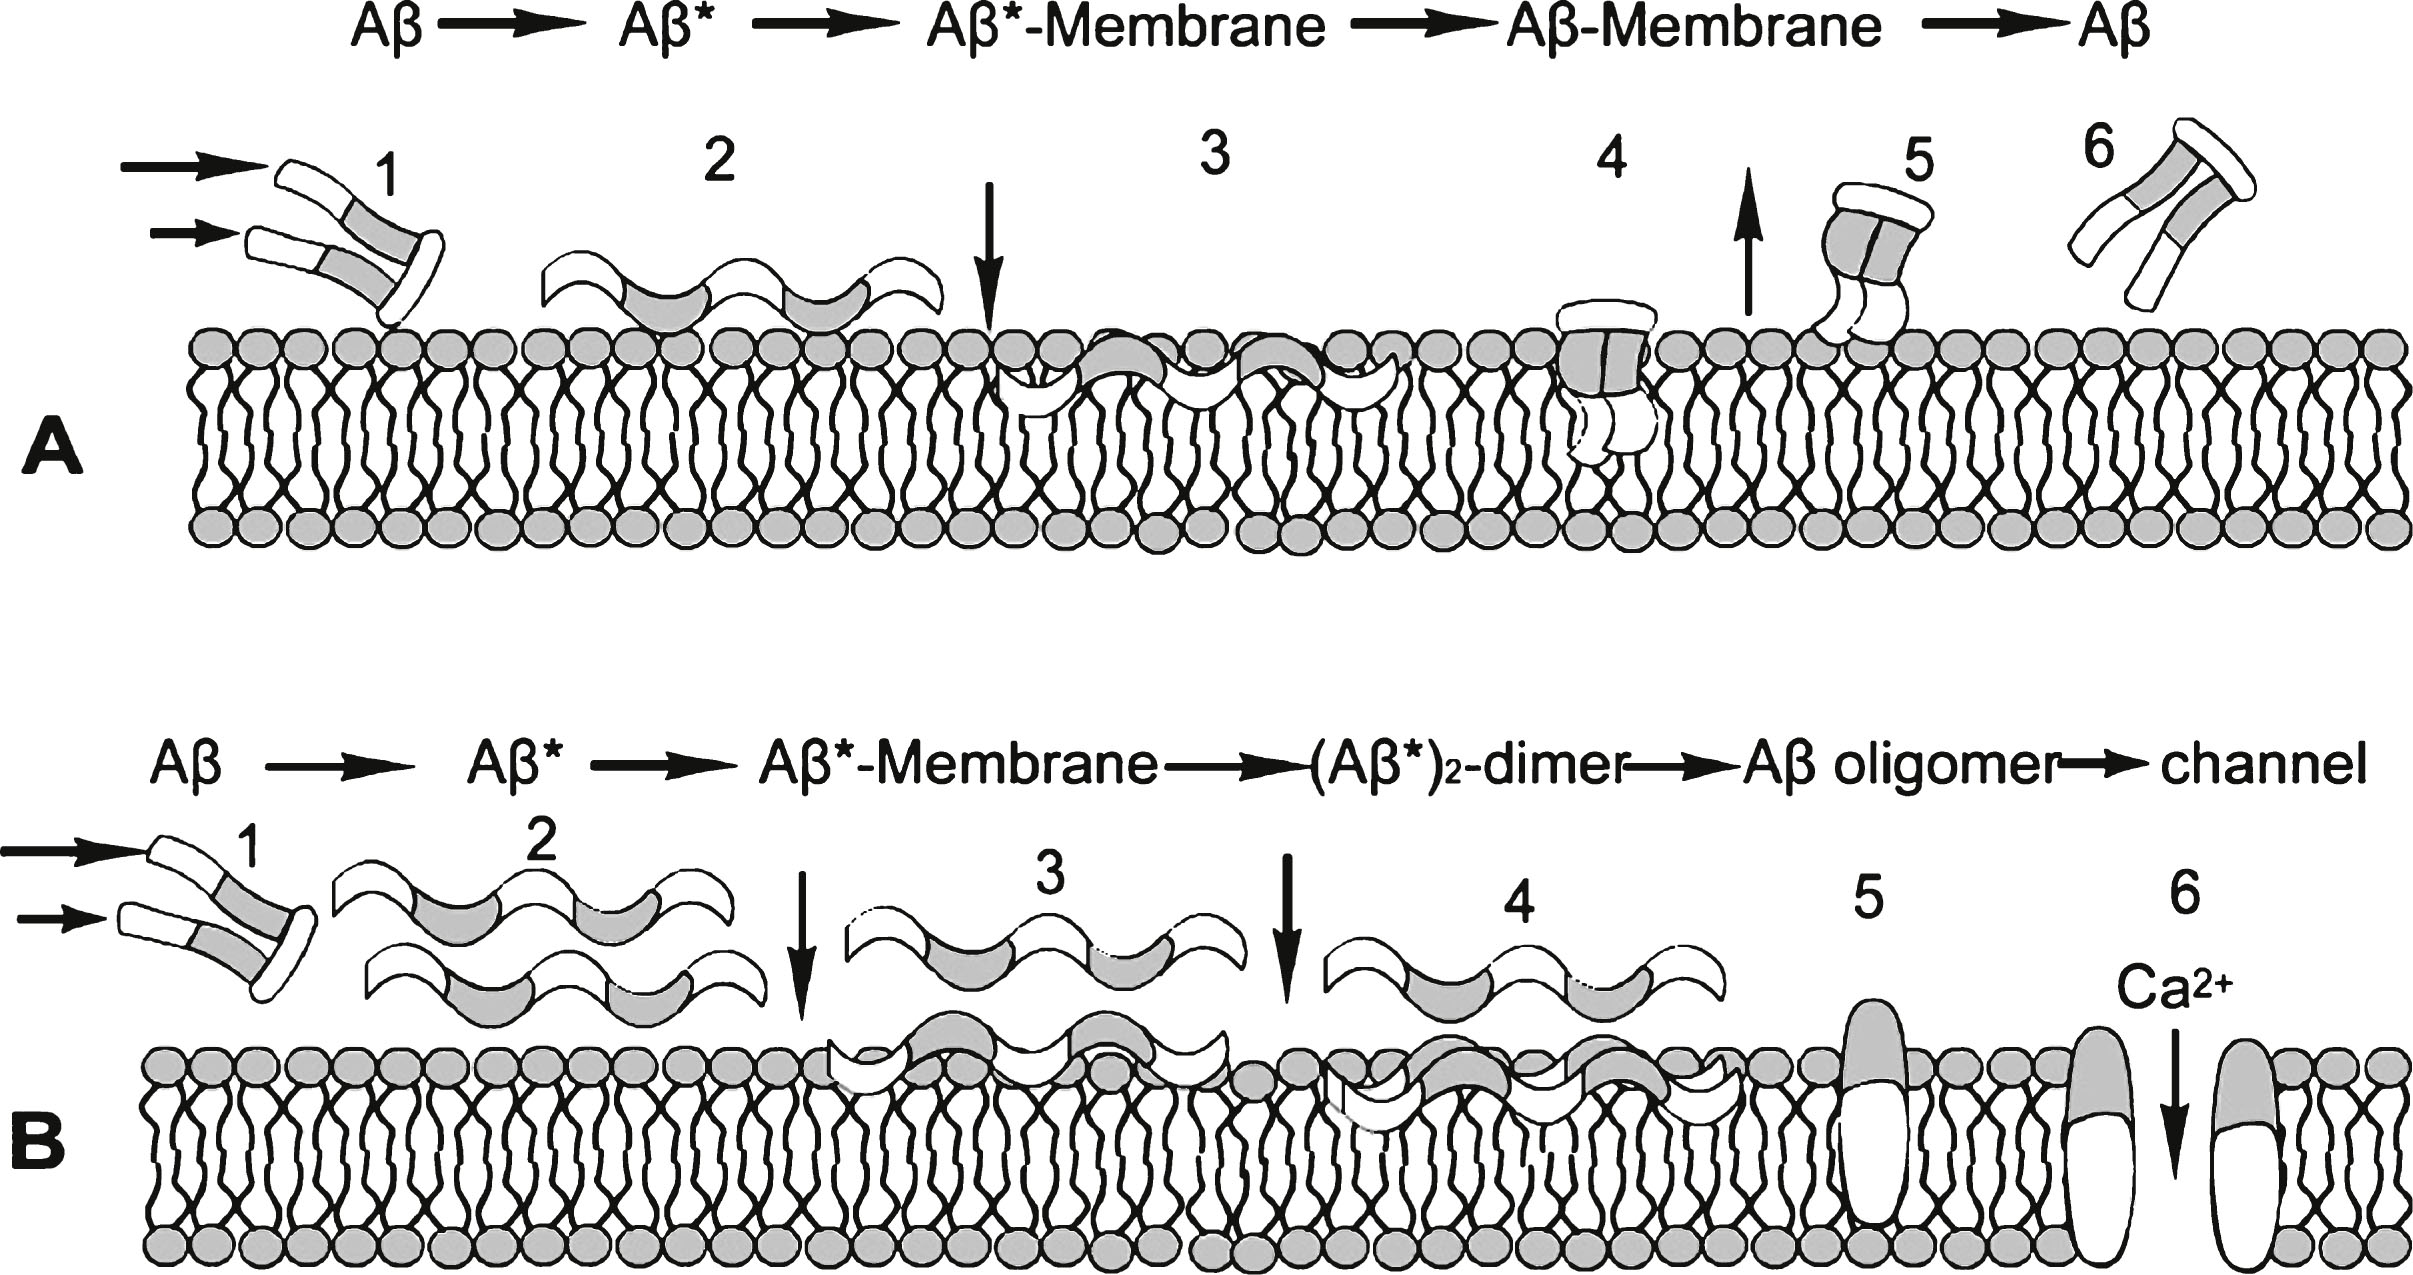 Proposed Aβ /Aβ*/membrane cycles with low (A) and high (B) Aβ concentrations. At low Aβ concentration, the sheared Aβ (A1) molecule forms Aβ* (A2) is attracted to and adsorbed by the membrane (A3), alters its conformation to a low energy state Aβ (A4) and is released from the membrane (A5) in (A6, reoriented to A1), keeping the steady state Aβ concentration low. At high Aβ concentrations (B), this A cycle is interrupted by the formation of an Aβ* dimer (B3, B4), which initiates the formation of stable oligomers within the membrane (B5). This process can be toxic, for example, by forming an open membrane flow path that allows free passage to ions such as Ca2 + (B6). White segments of the Aβ* molecule are hydrophobic and gray segments are hydrophilic. The same scheme is applied to the membrane, hydrophobic tails of which attract corresponding Aβ segments, and similarly with hydrophilic segments.